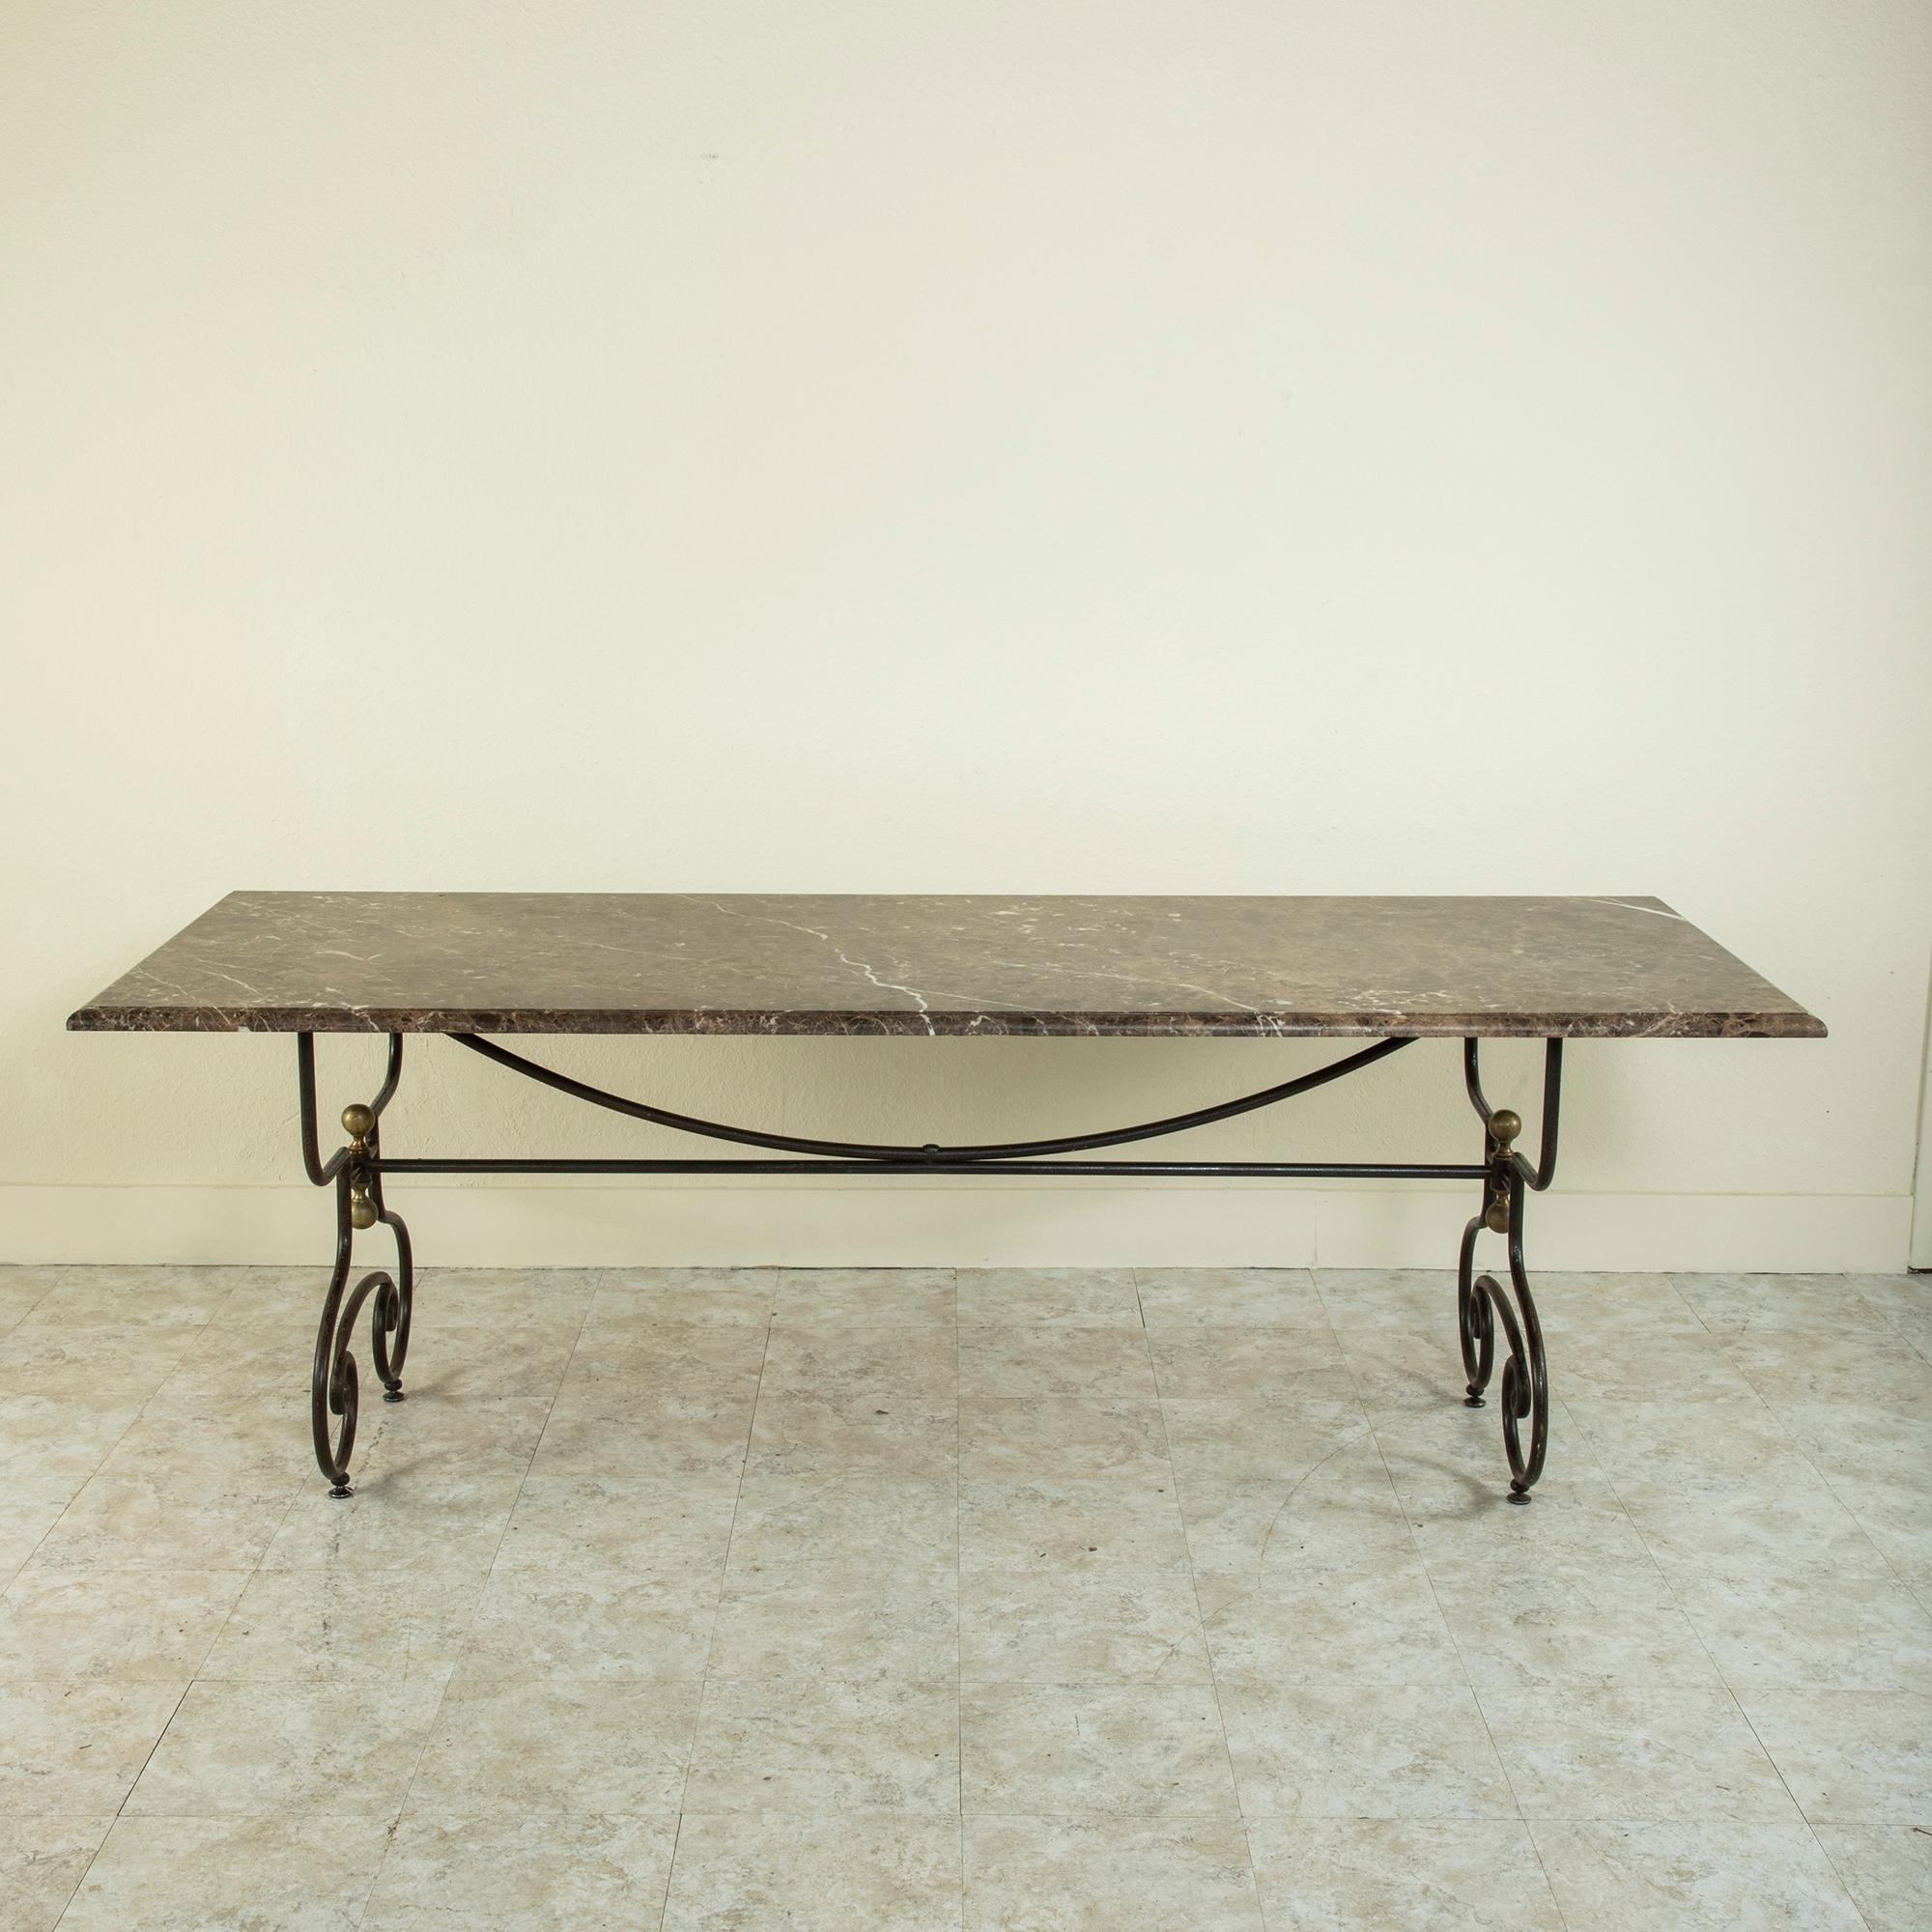 This mid-twentieth century French iron dining table features an 86 inch long beveled marble top. The marble top rests on a scrolled iron base detailed with bronze finials. An iron stretcher joins the legs and provides additional stability. An ideal